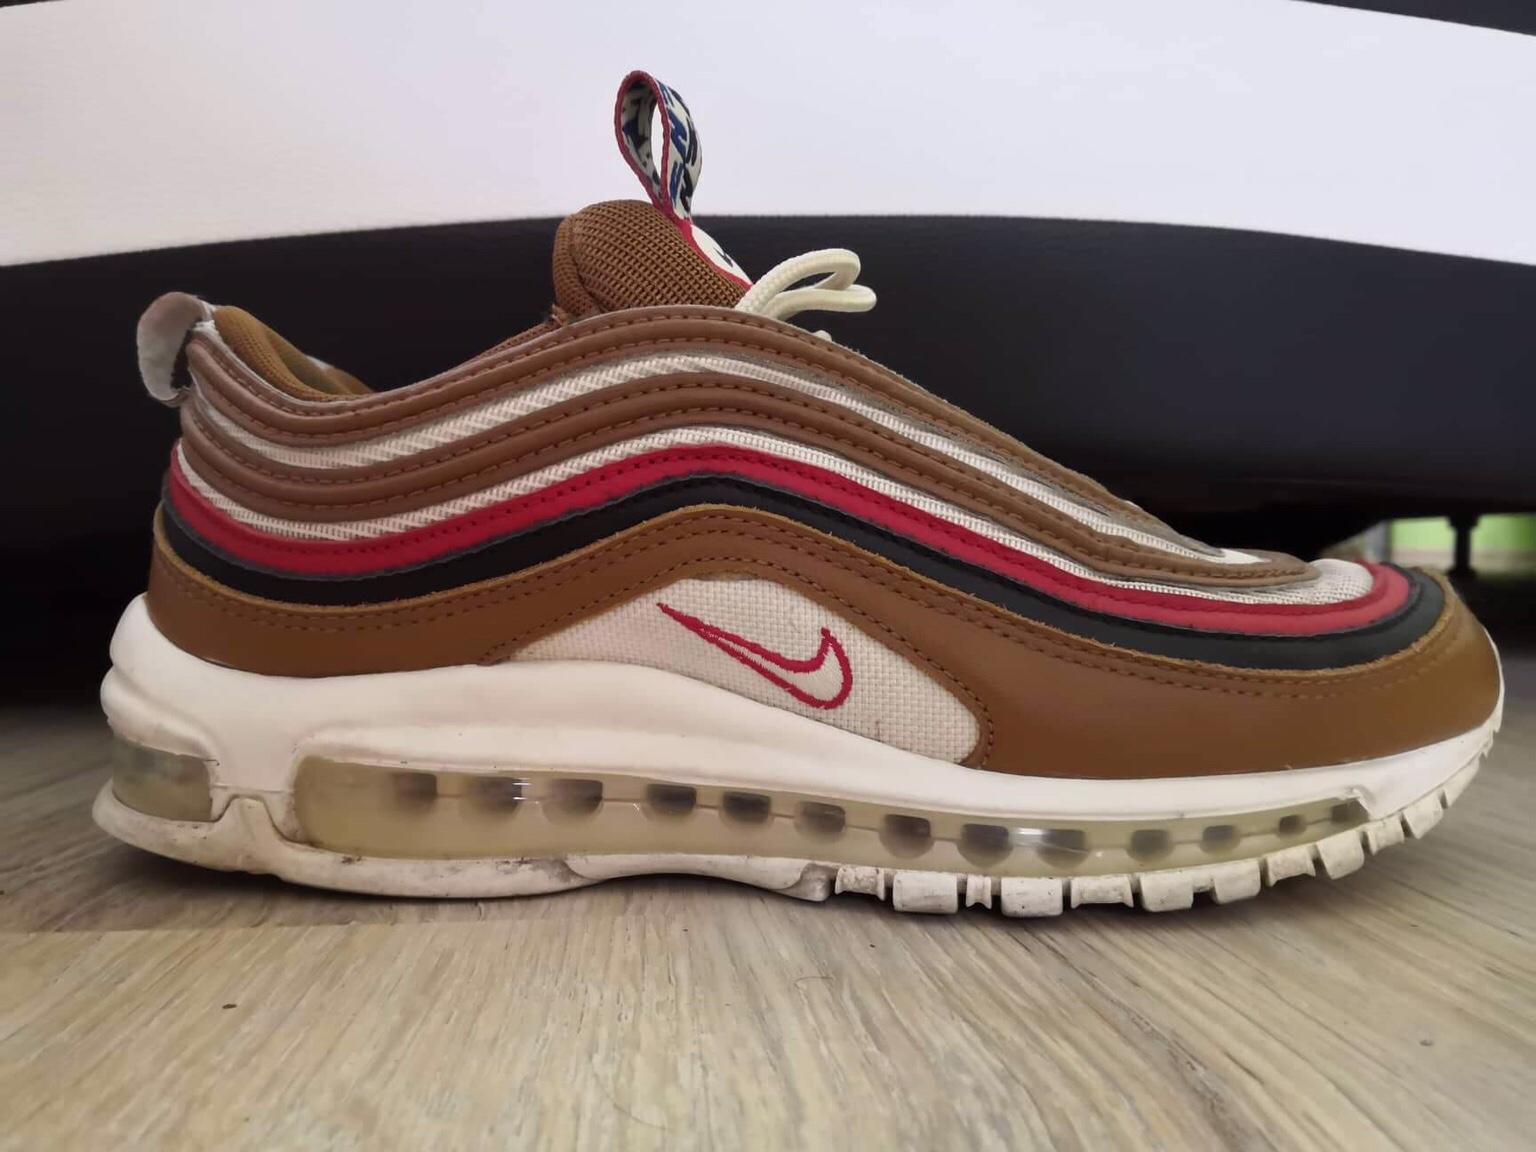 Finally, Promotions How To With Nike Air Max 97 Trainer